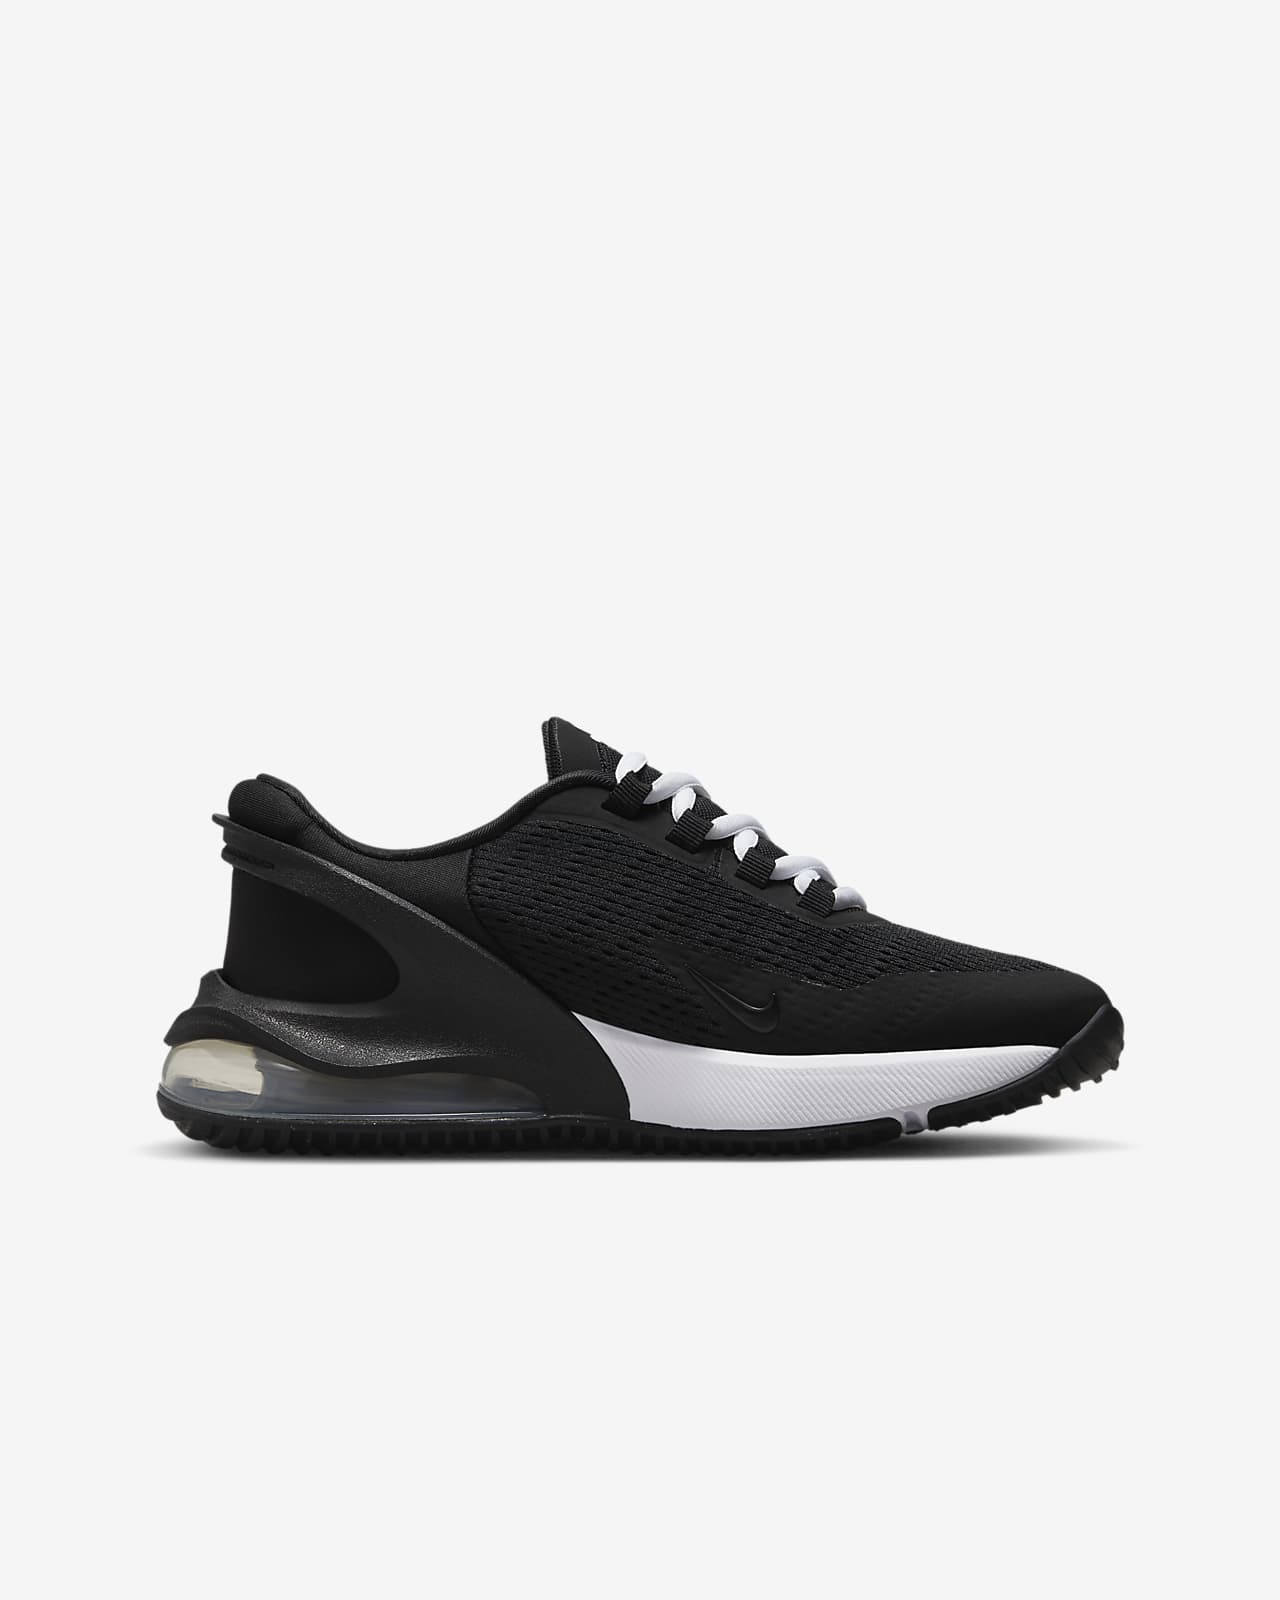 Nike Air Max 270 GO Big Kids' Easy On/Off Shoes.